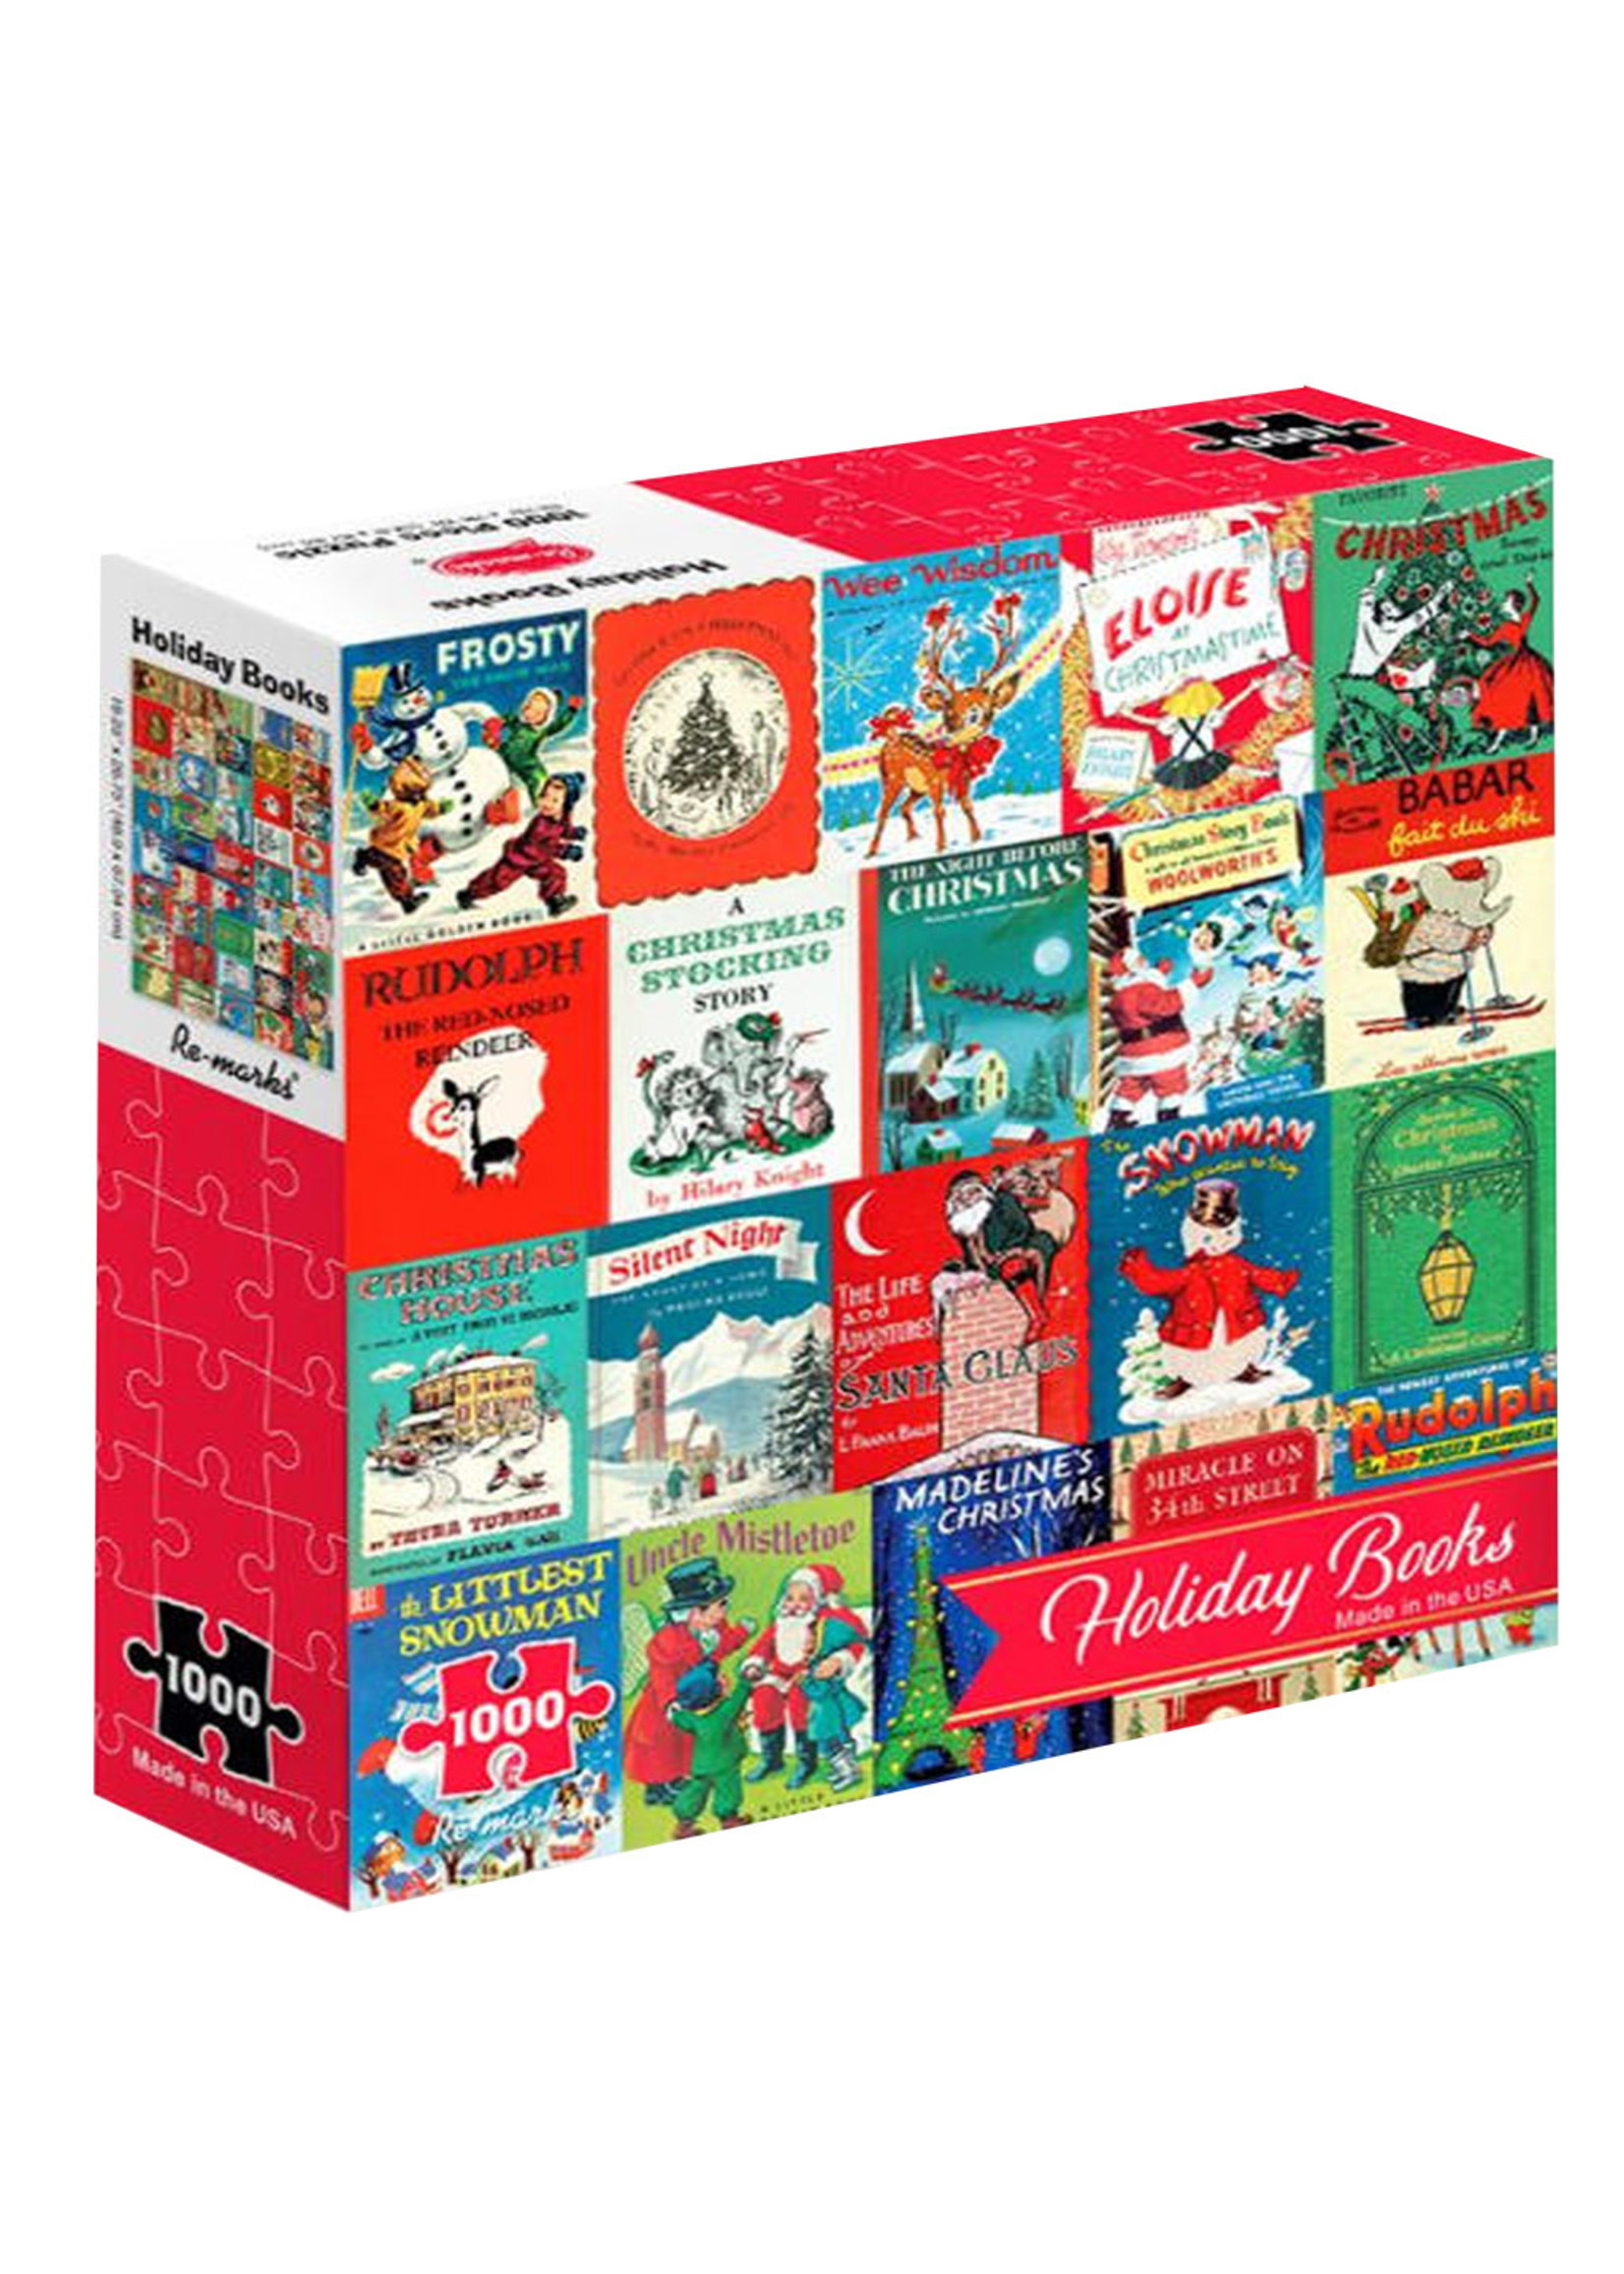 Re-Marks 1000 pc puzzle Holiday Books